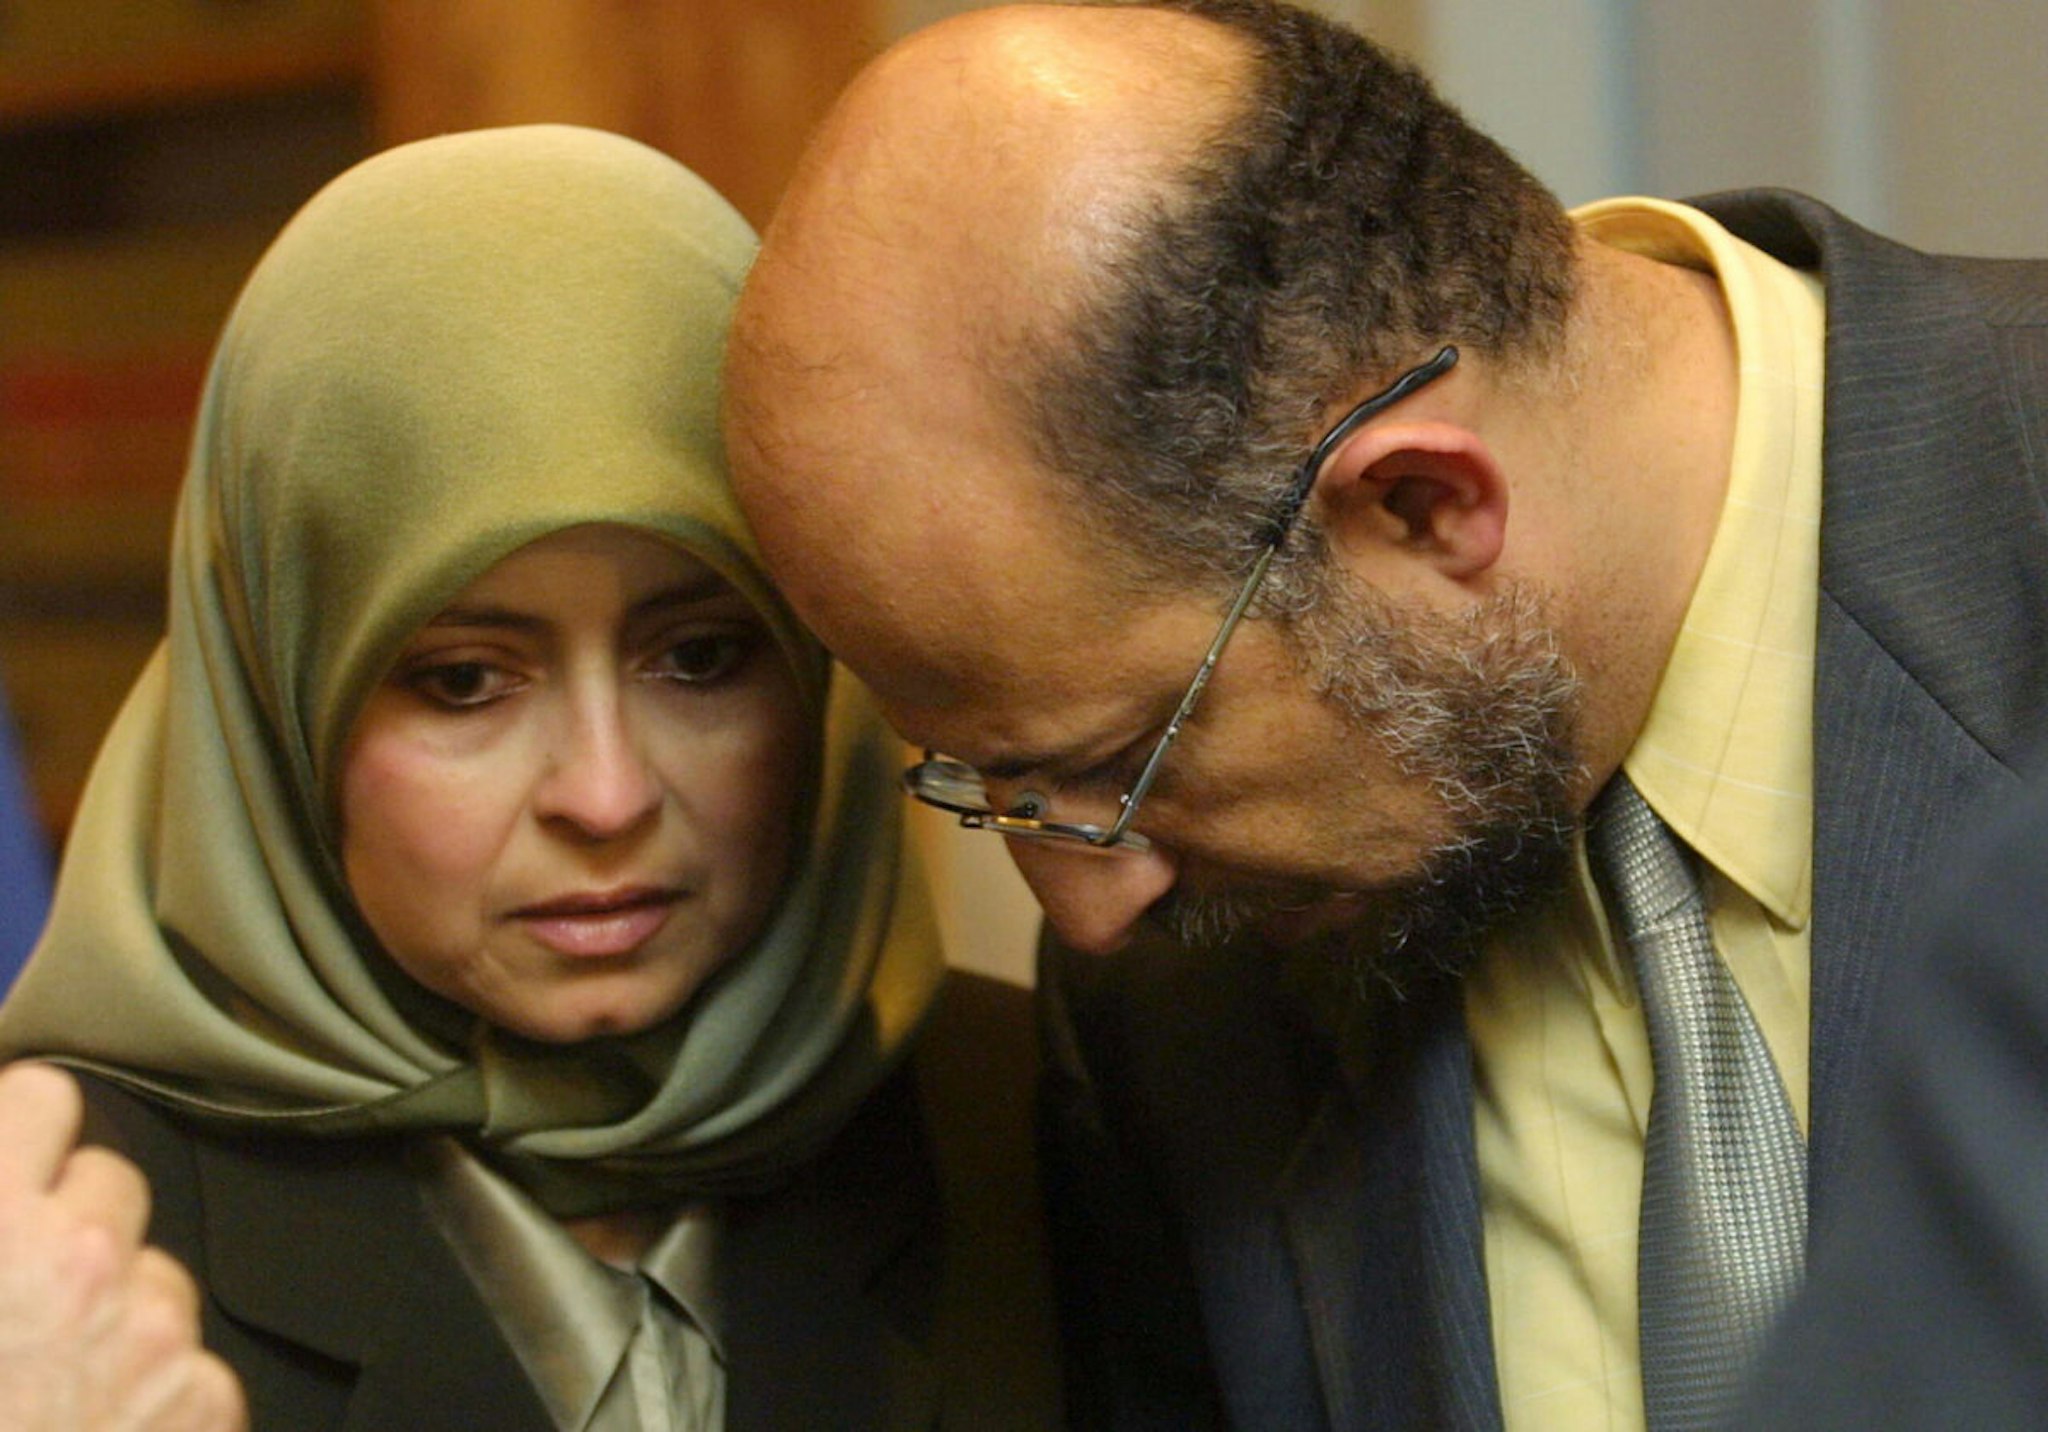 TAMPA, FL - AUGUST 22: University of South Florida tenured computer science professor Sami Al-Arian (R) speaks with his wife Nahla before a news conference August 22, 2002 in Tampa, Florida. The school filed a lawsuit August 21, 2002 against Al-Arian that would allow the university to fire him on charges of alleged ties to militant Islamic groups if a court rules that the termination would not be a violation of Al-Arian's constitutional rights. The Palestinian professor denied the charges and said that he would fight for his job.